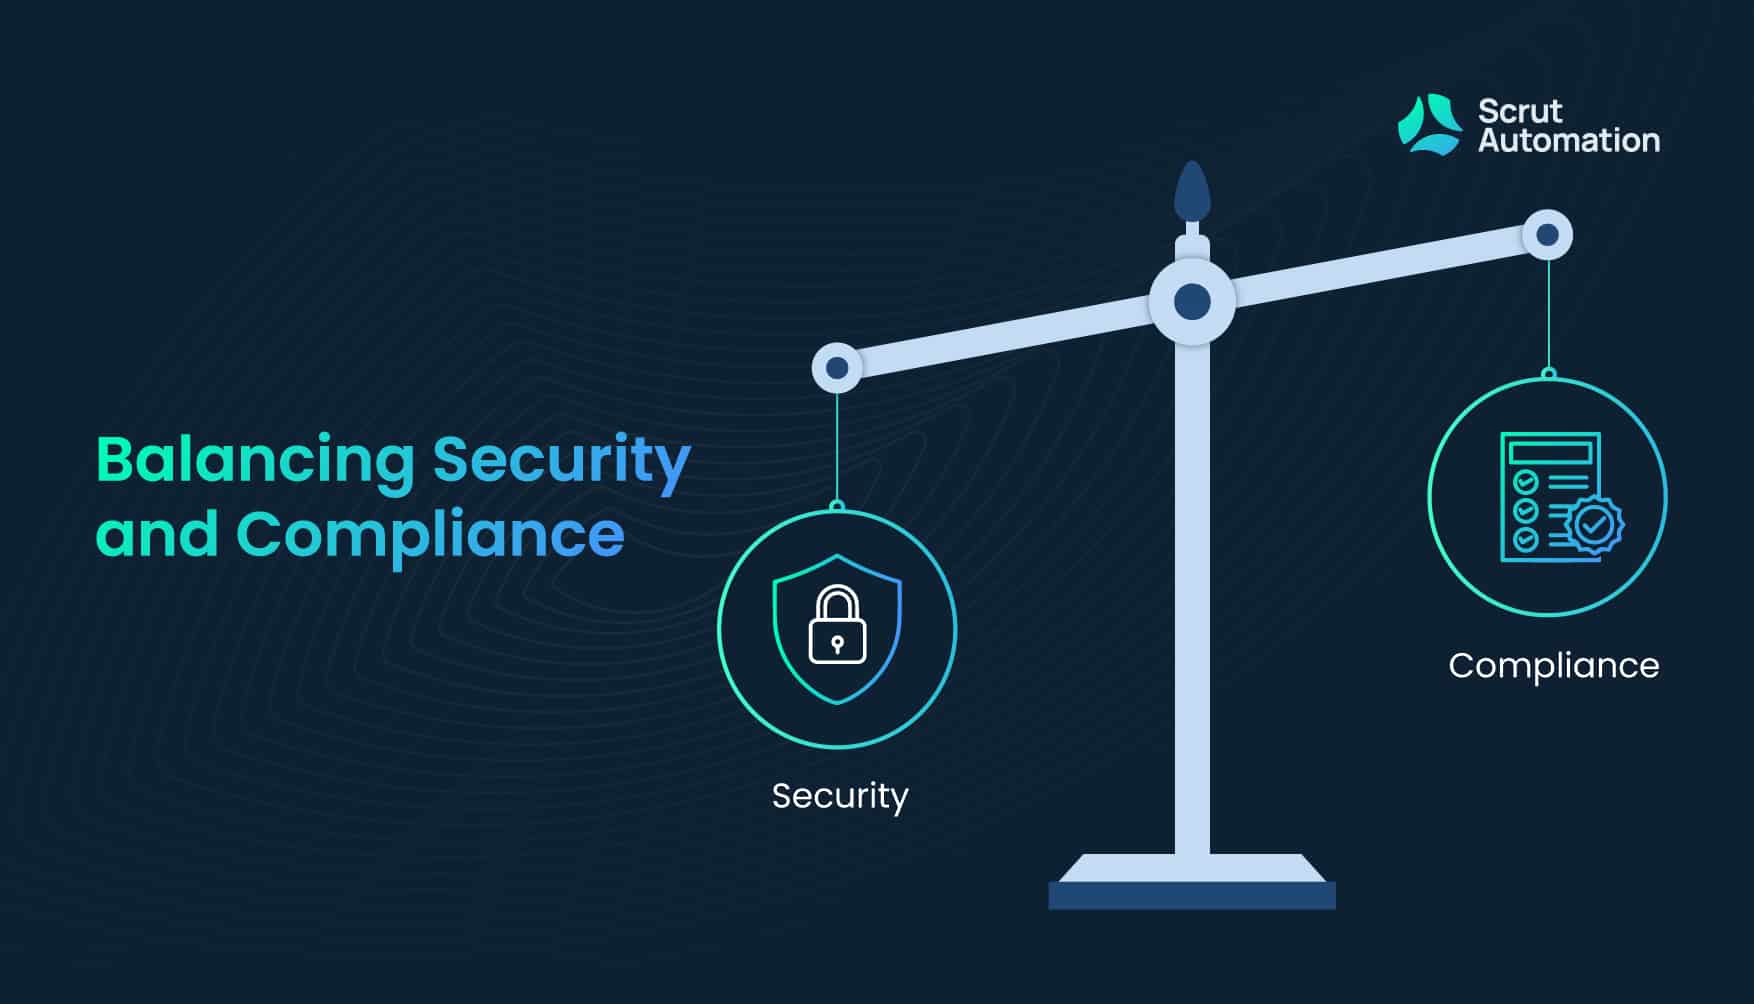 Balancing Security and Compliance to Prevent Cyber Attacks